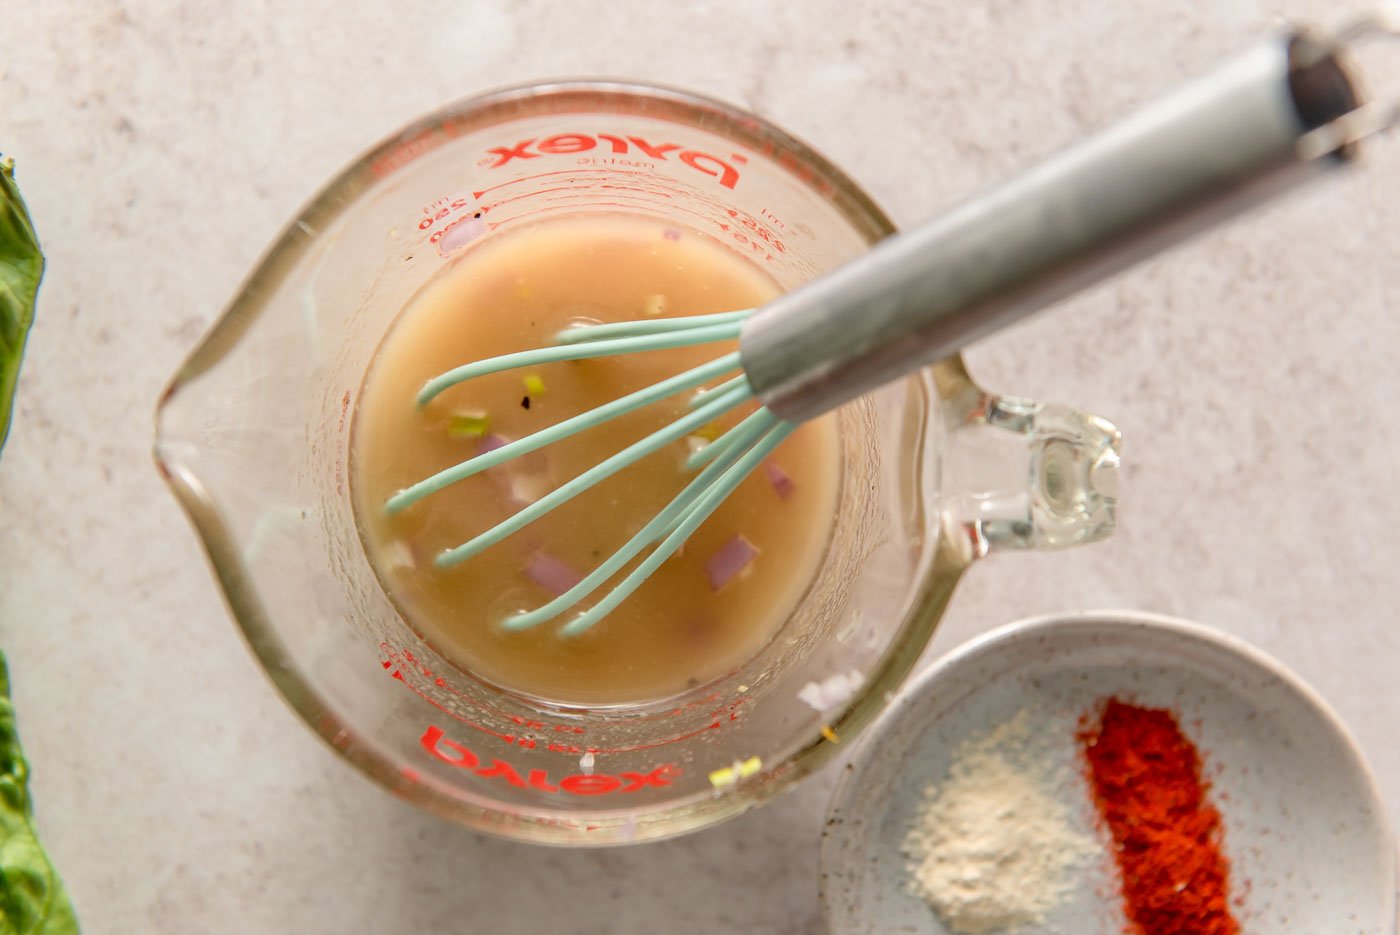 Italian vinaigrette with chopped shallot in a glass measuring up with a whisk resting in it.